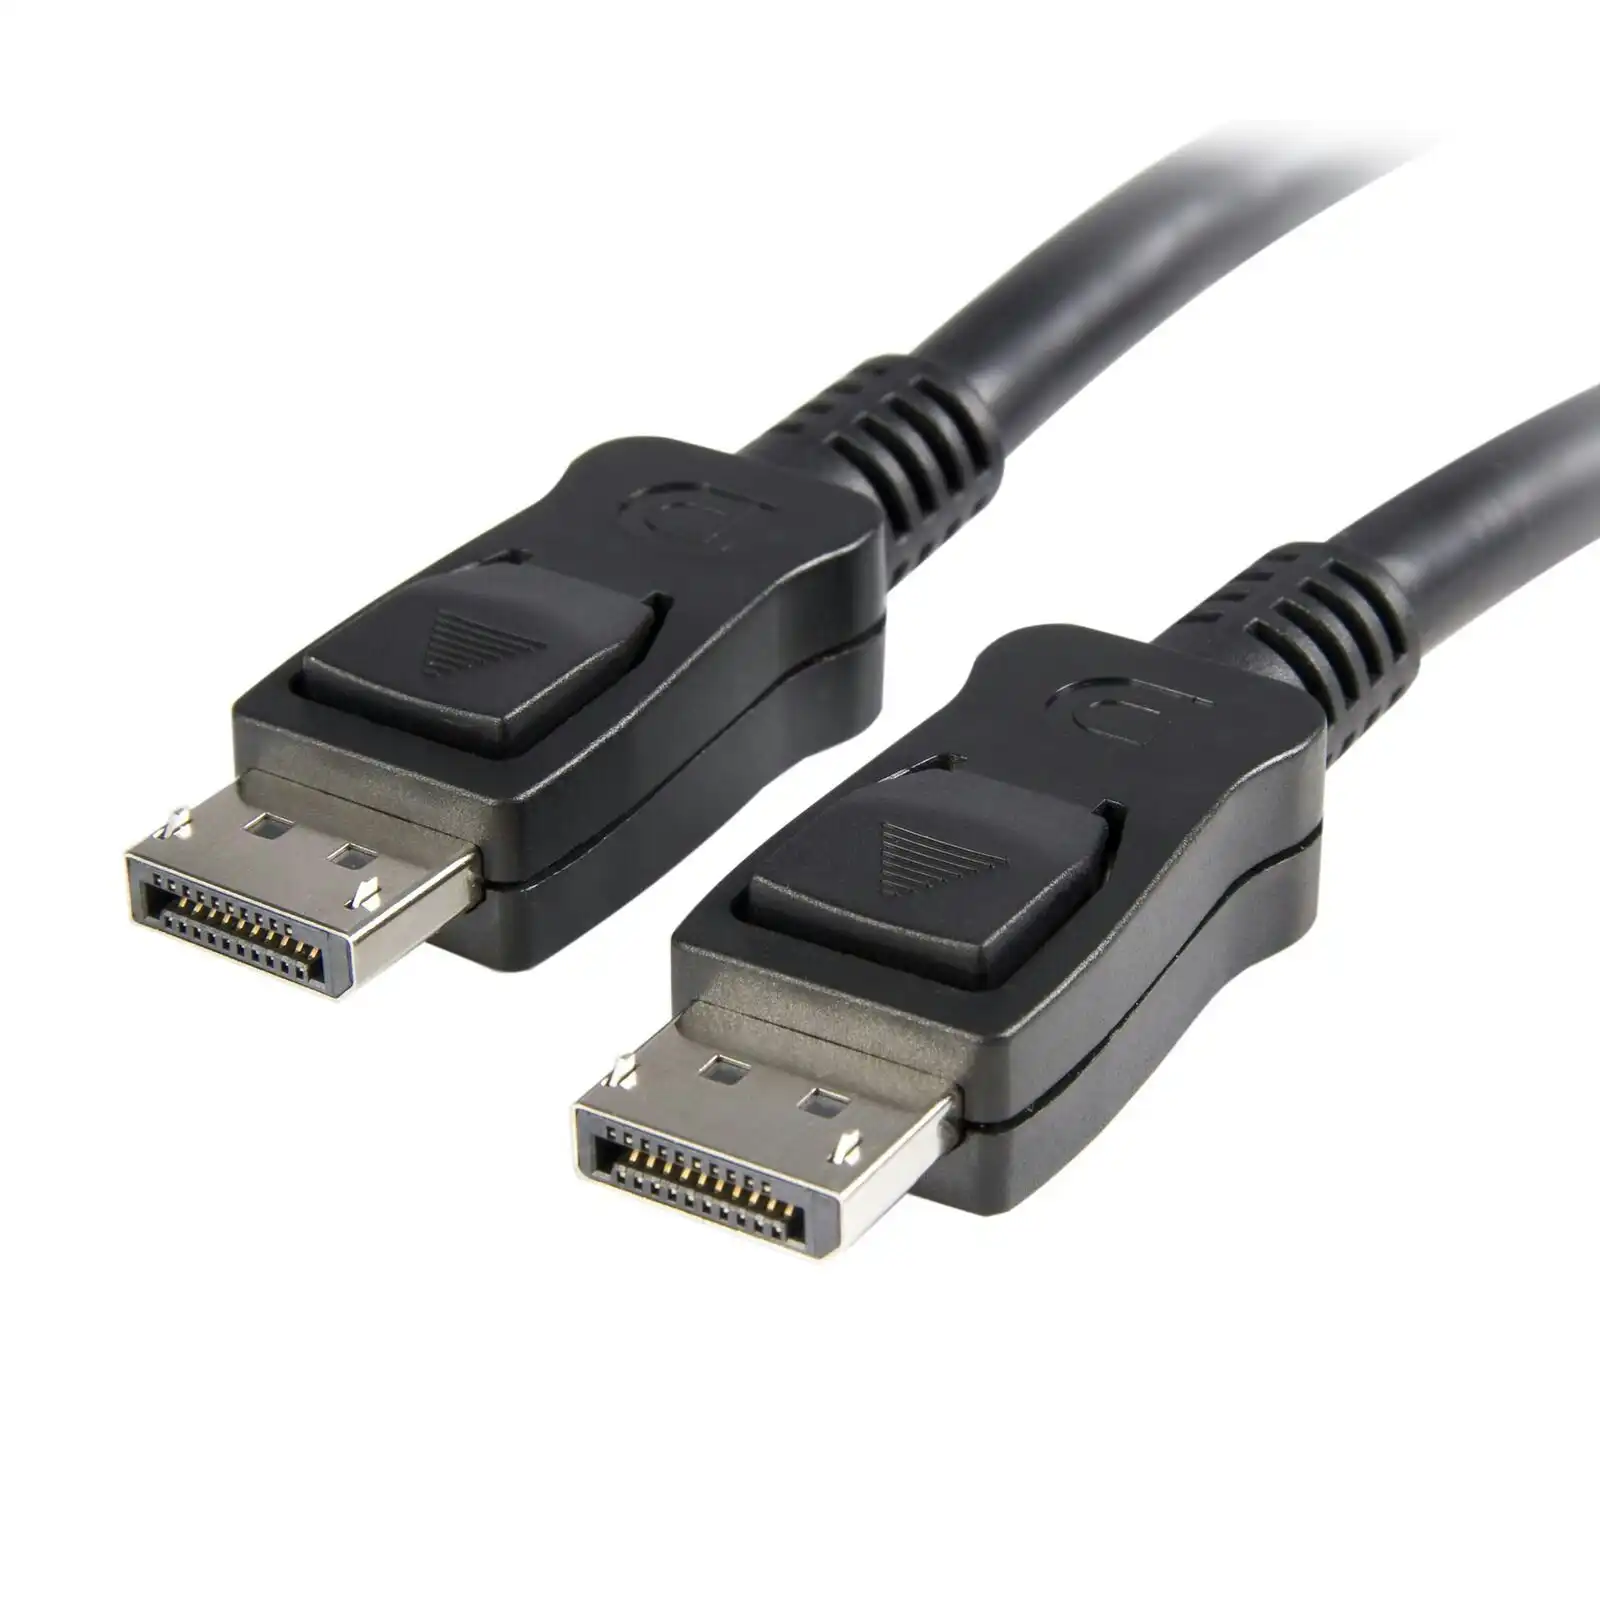 Star Tech DisplayPort Cable 1m Male To Male 4k x 2k/60Hz For PC/Monitors/Laptops